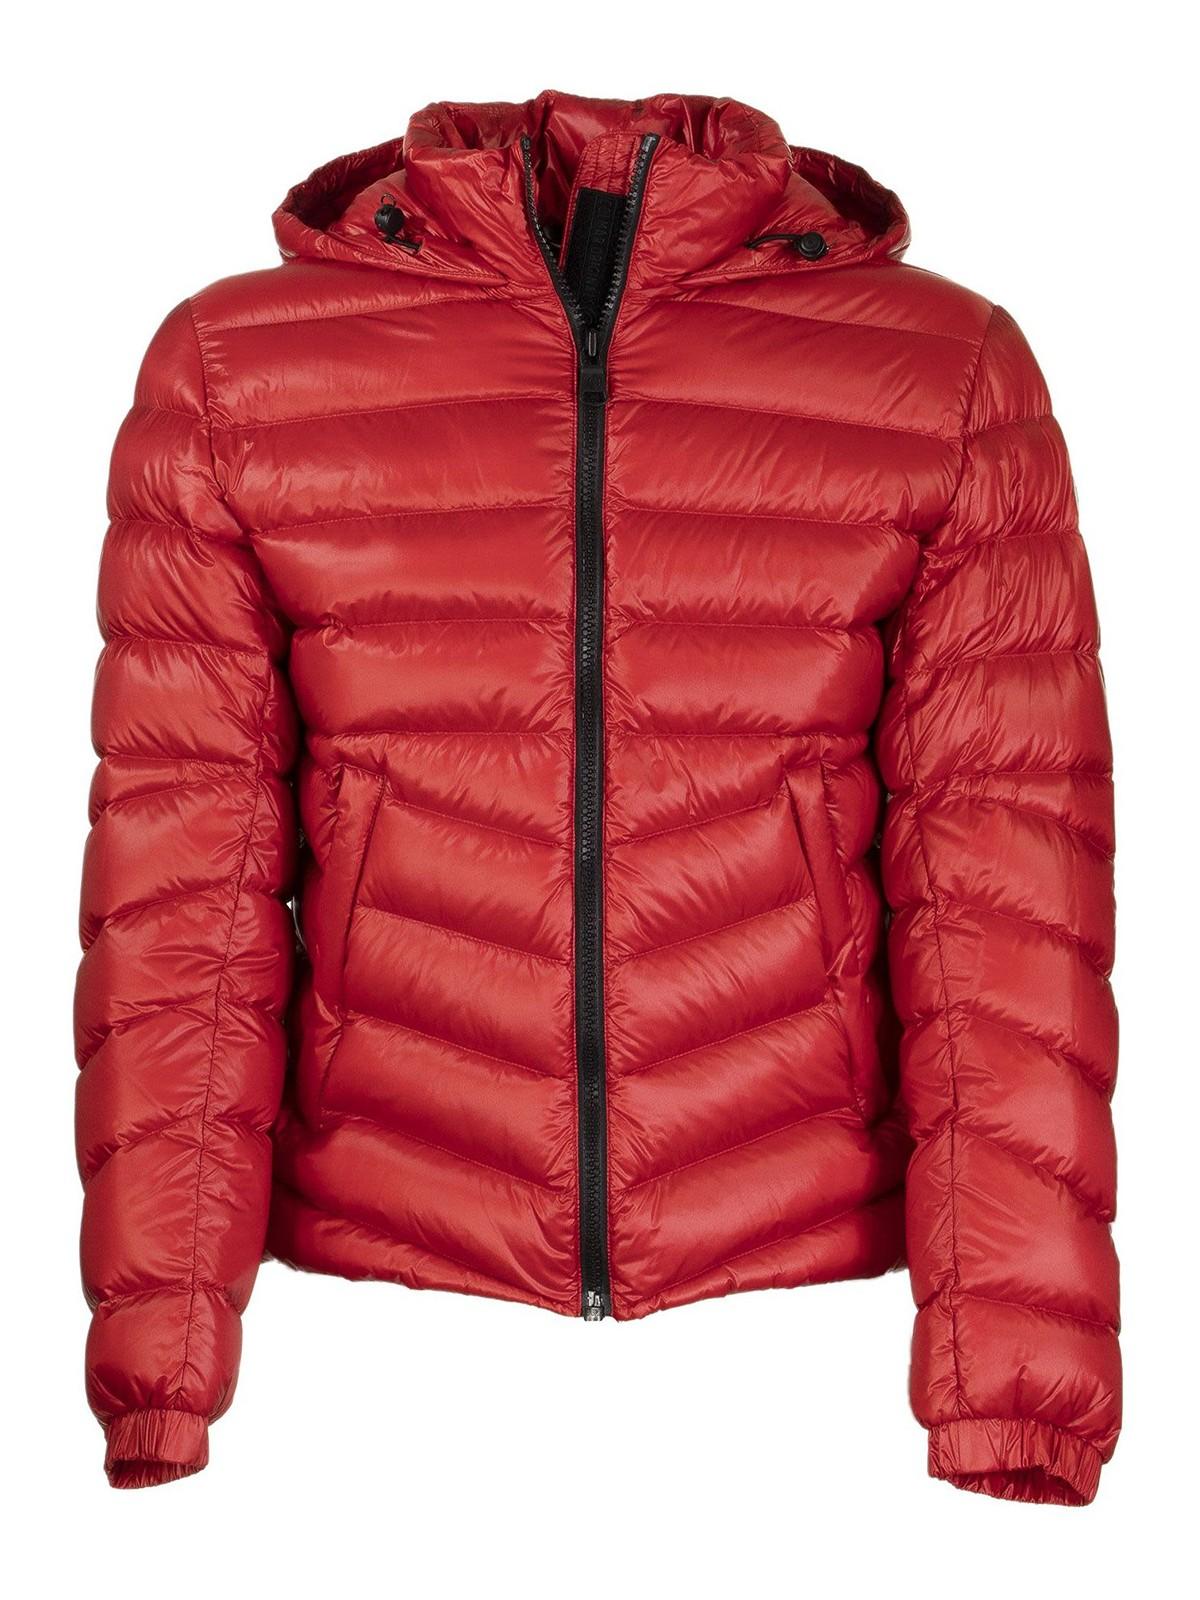 Colmar Synthetic Quilted Nylon Puffer Jacket in Red for Men - Lyst